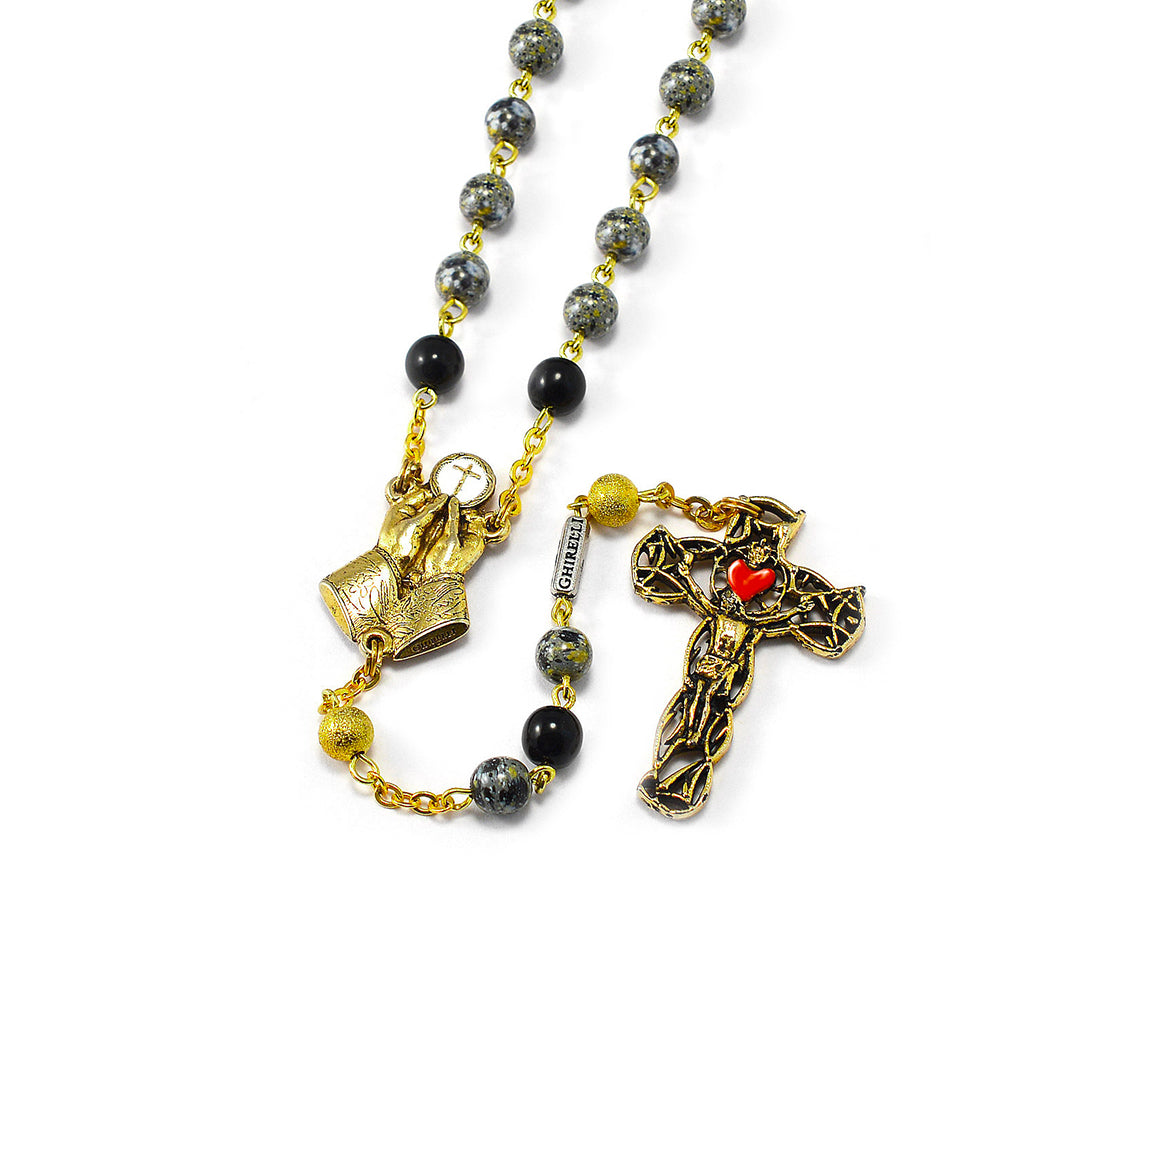 Our Lady of Fatima Heart Rosary